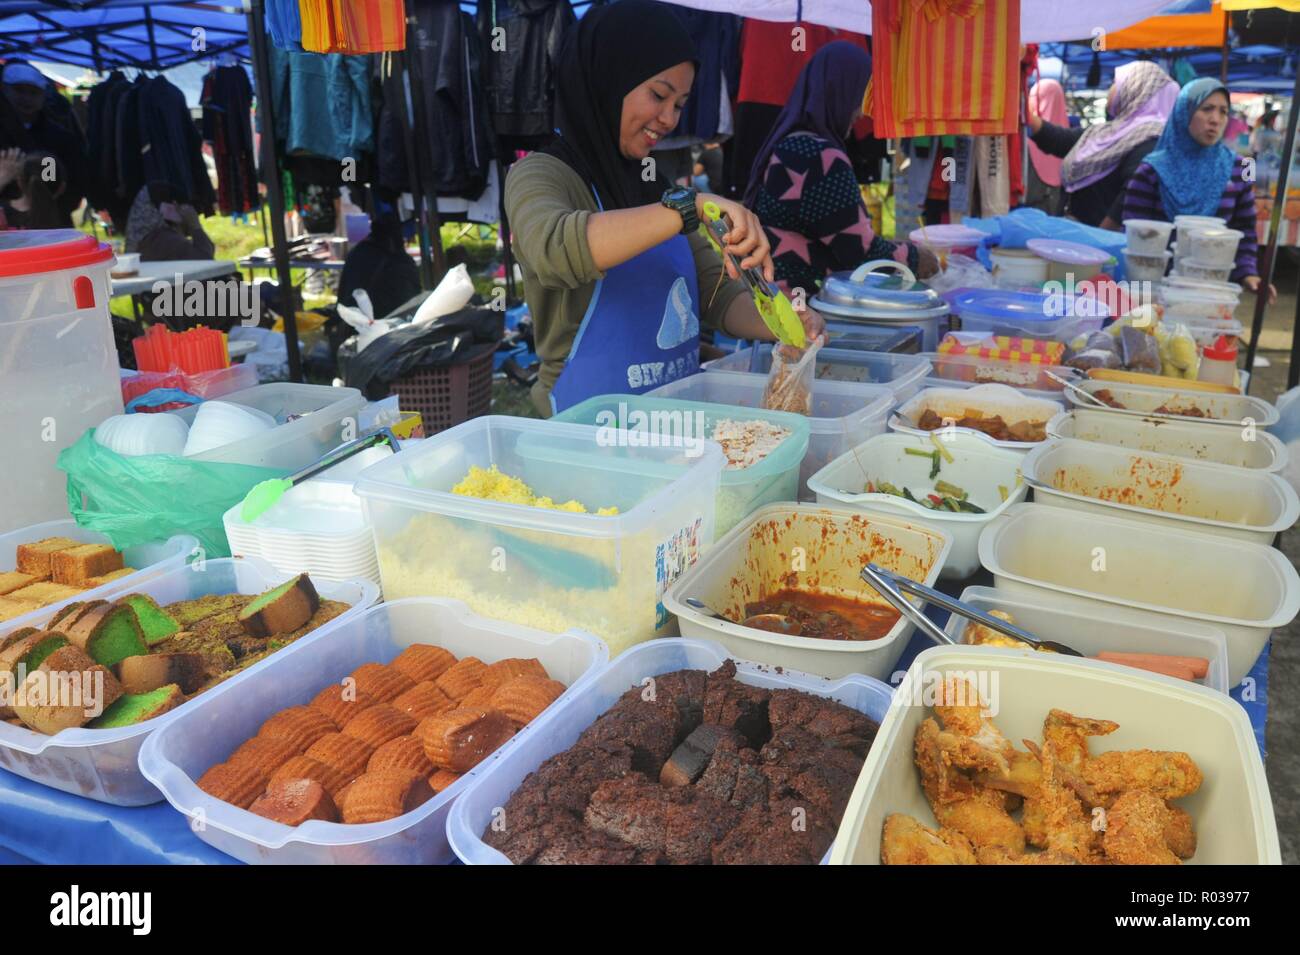 Tamparuli Sabah Malaysia - Aug 8, 2018 : Street food vendor selling cake at open market stall. Street eatery is popular among local and tourist. Stock Photo